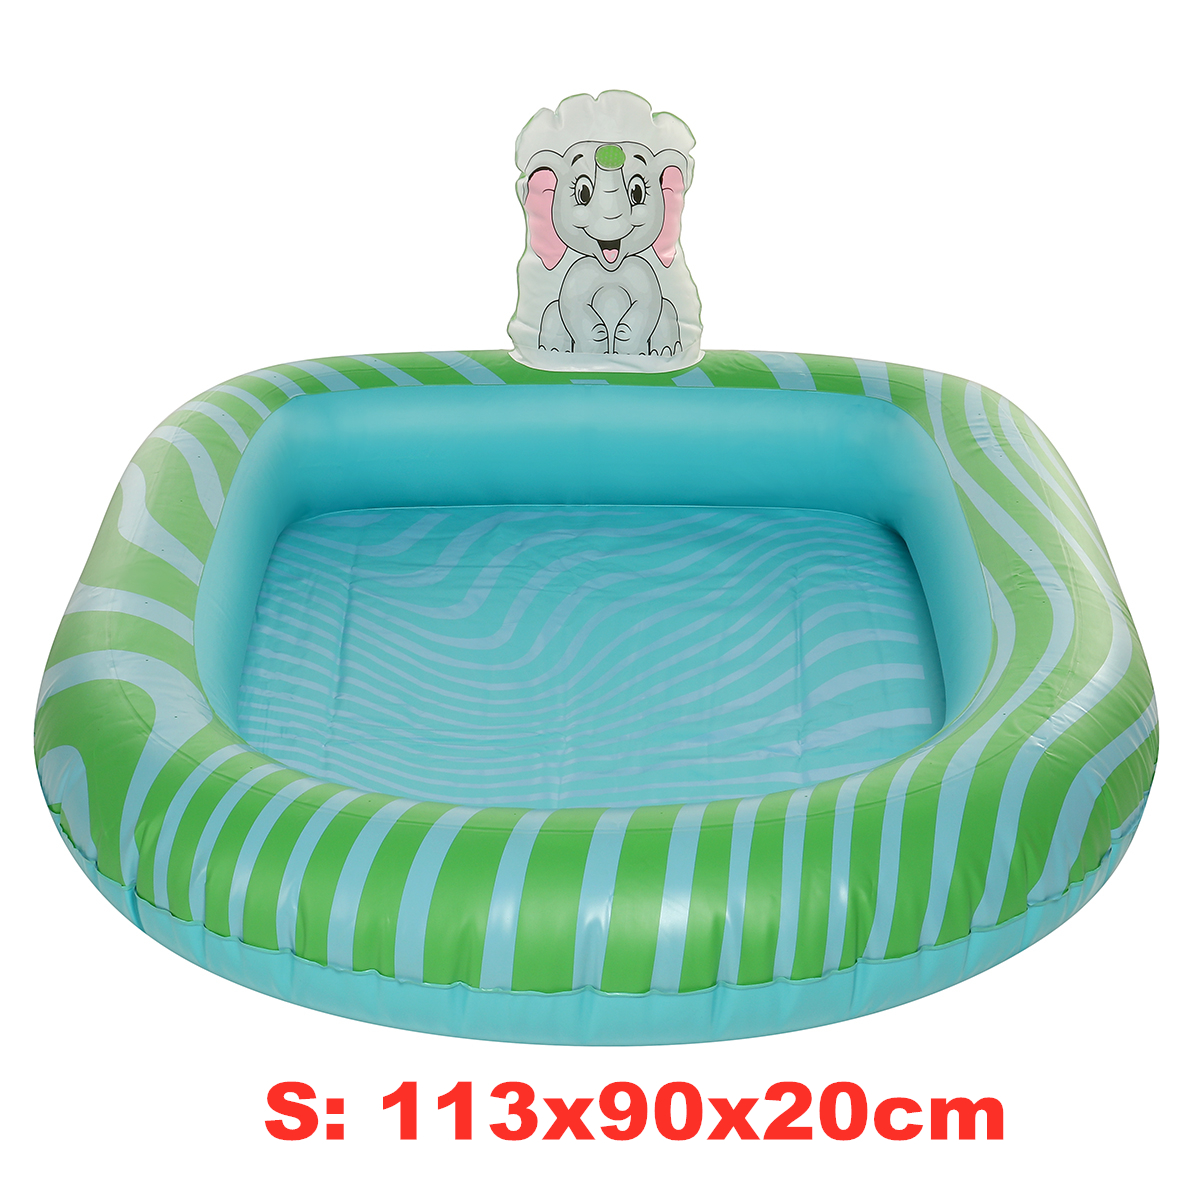 PVC-Children-Inflatable-Swimming-Pool-Sprinkler-Pool-Thickened-Cartoon-Pattern-Outdoor-Swimming-Wate-1851764-7